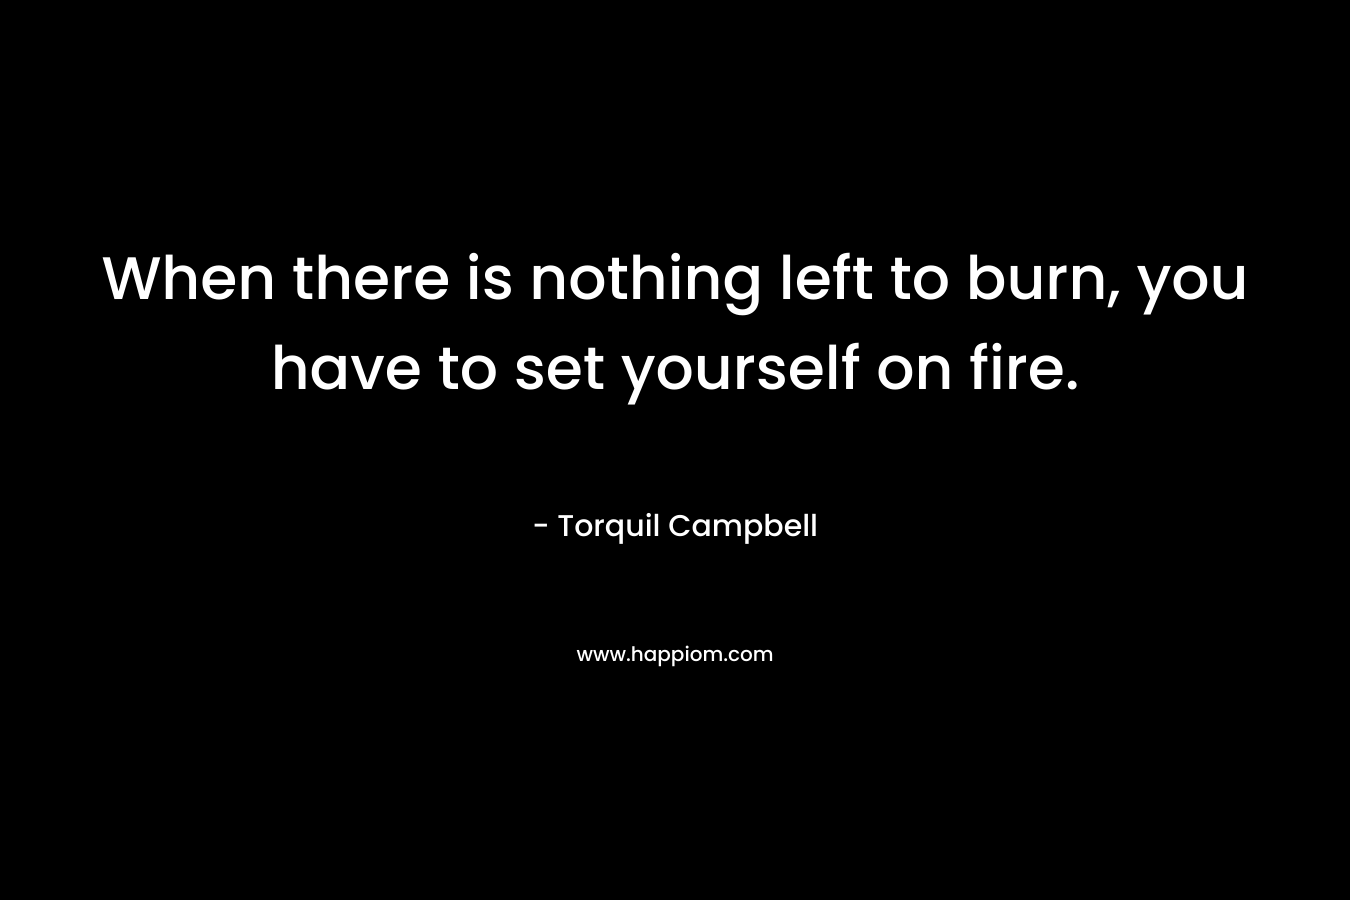 When there is nothing left to burn, you have to set yourself on fire.